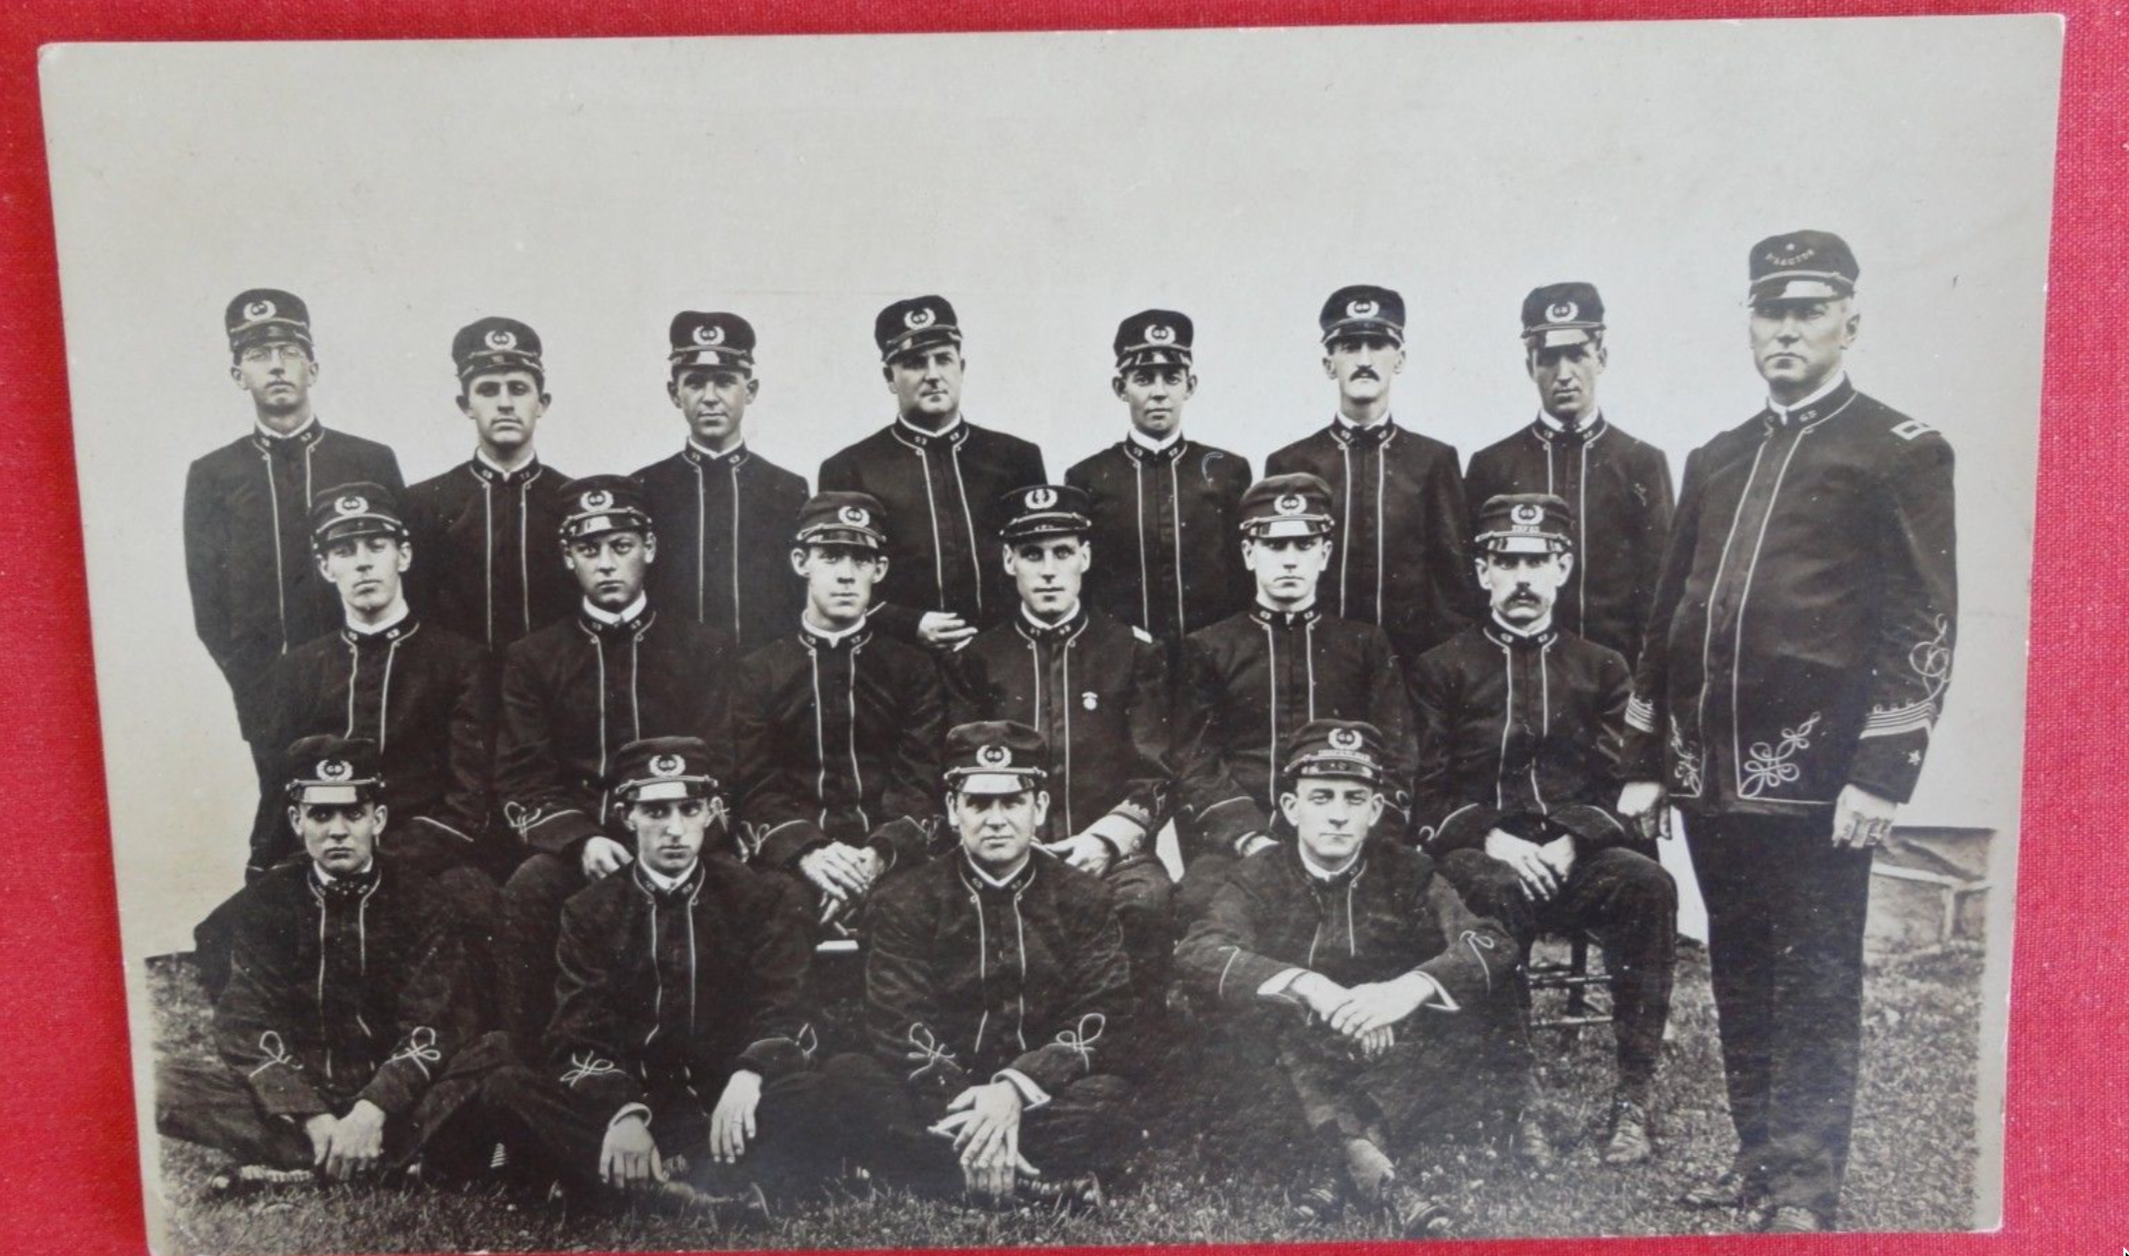 Medford - William B Cooper picture of men in uniforms - Looks like a band without instuments - c 1910